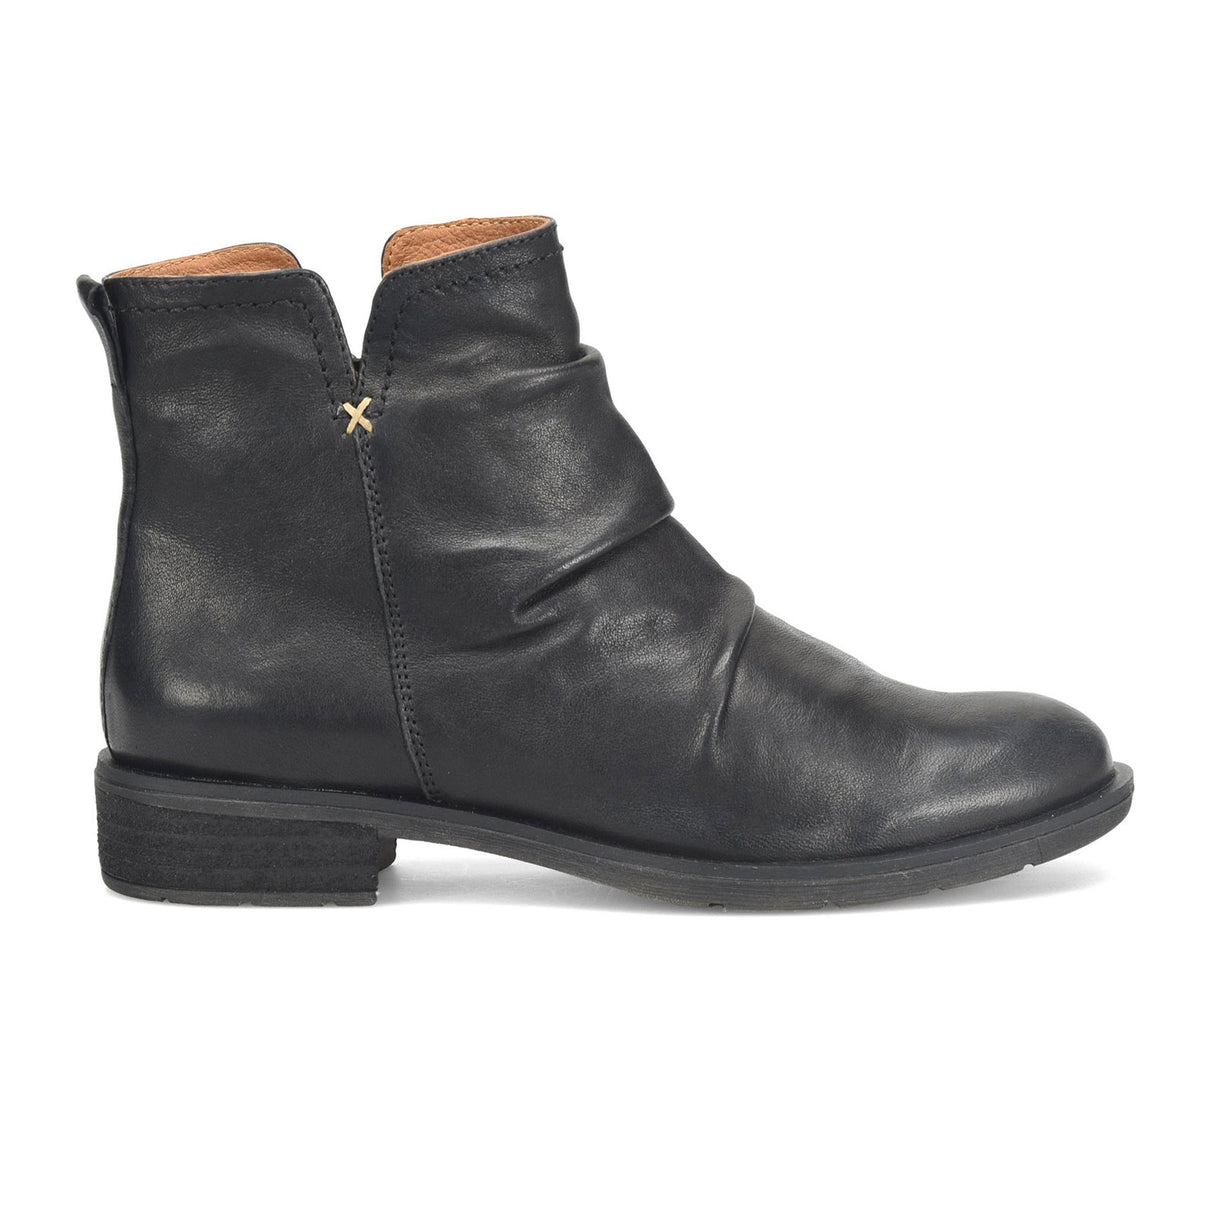 Sofft Beckie Ankle Boot (Women) - Black Boots - Fashion - Low - The Heel Shoe Fitters